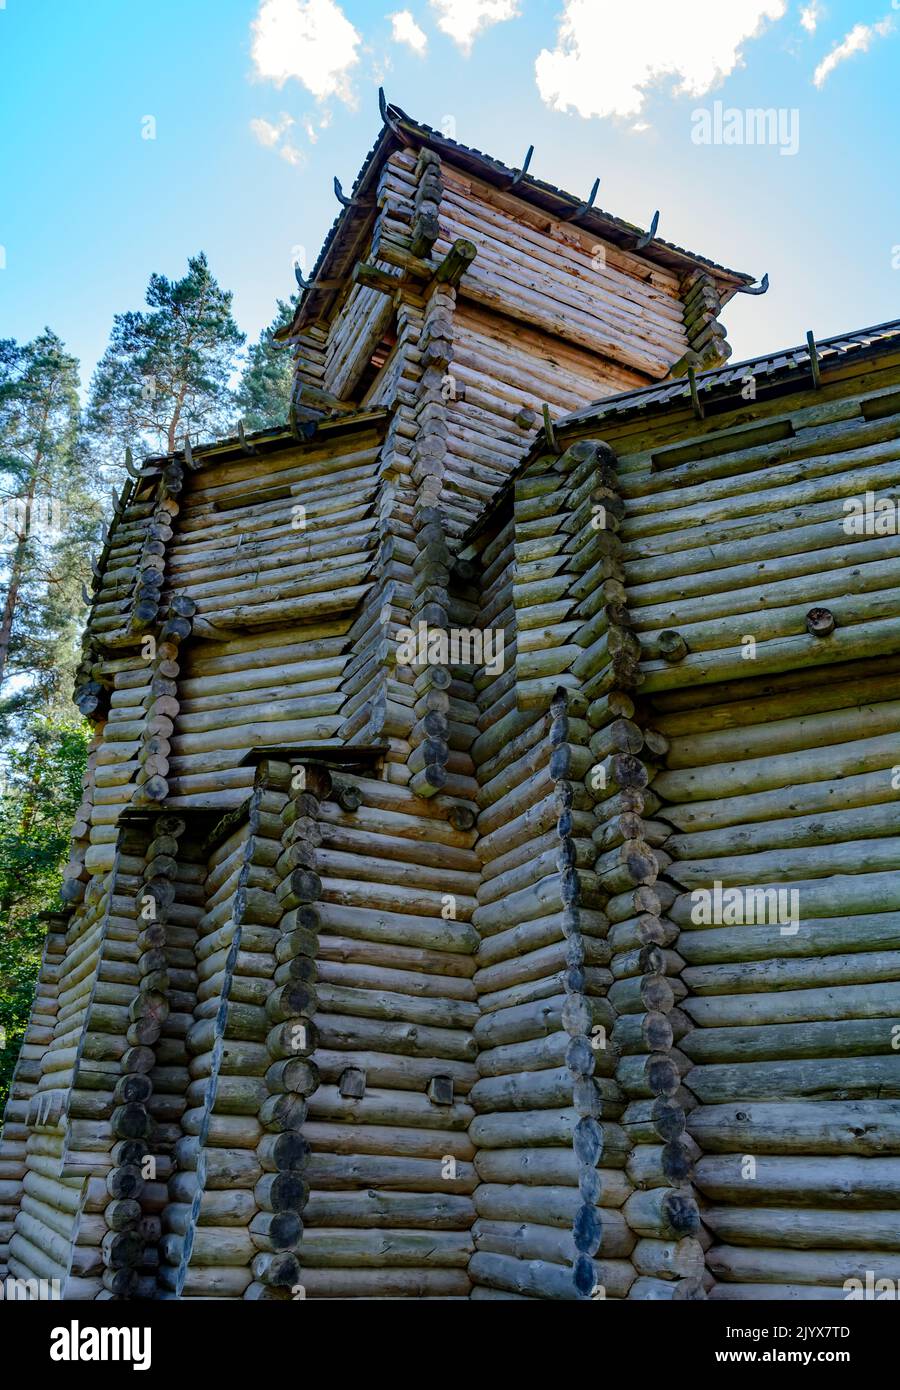 Real-life version of a 12th century Semigallian fortification on the nearby Tervete Hillfort, Latvia. Tervete wooden castle. Stock Photo